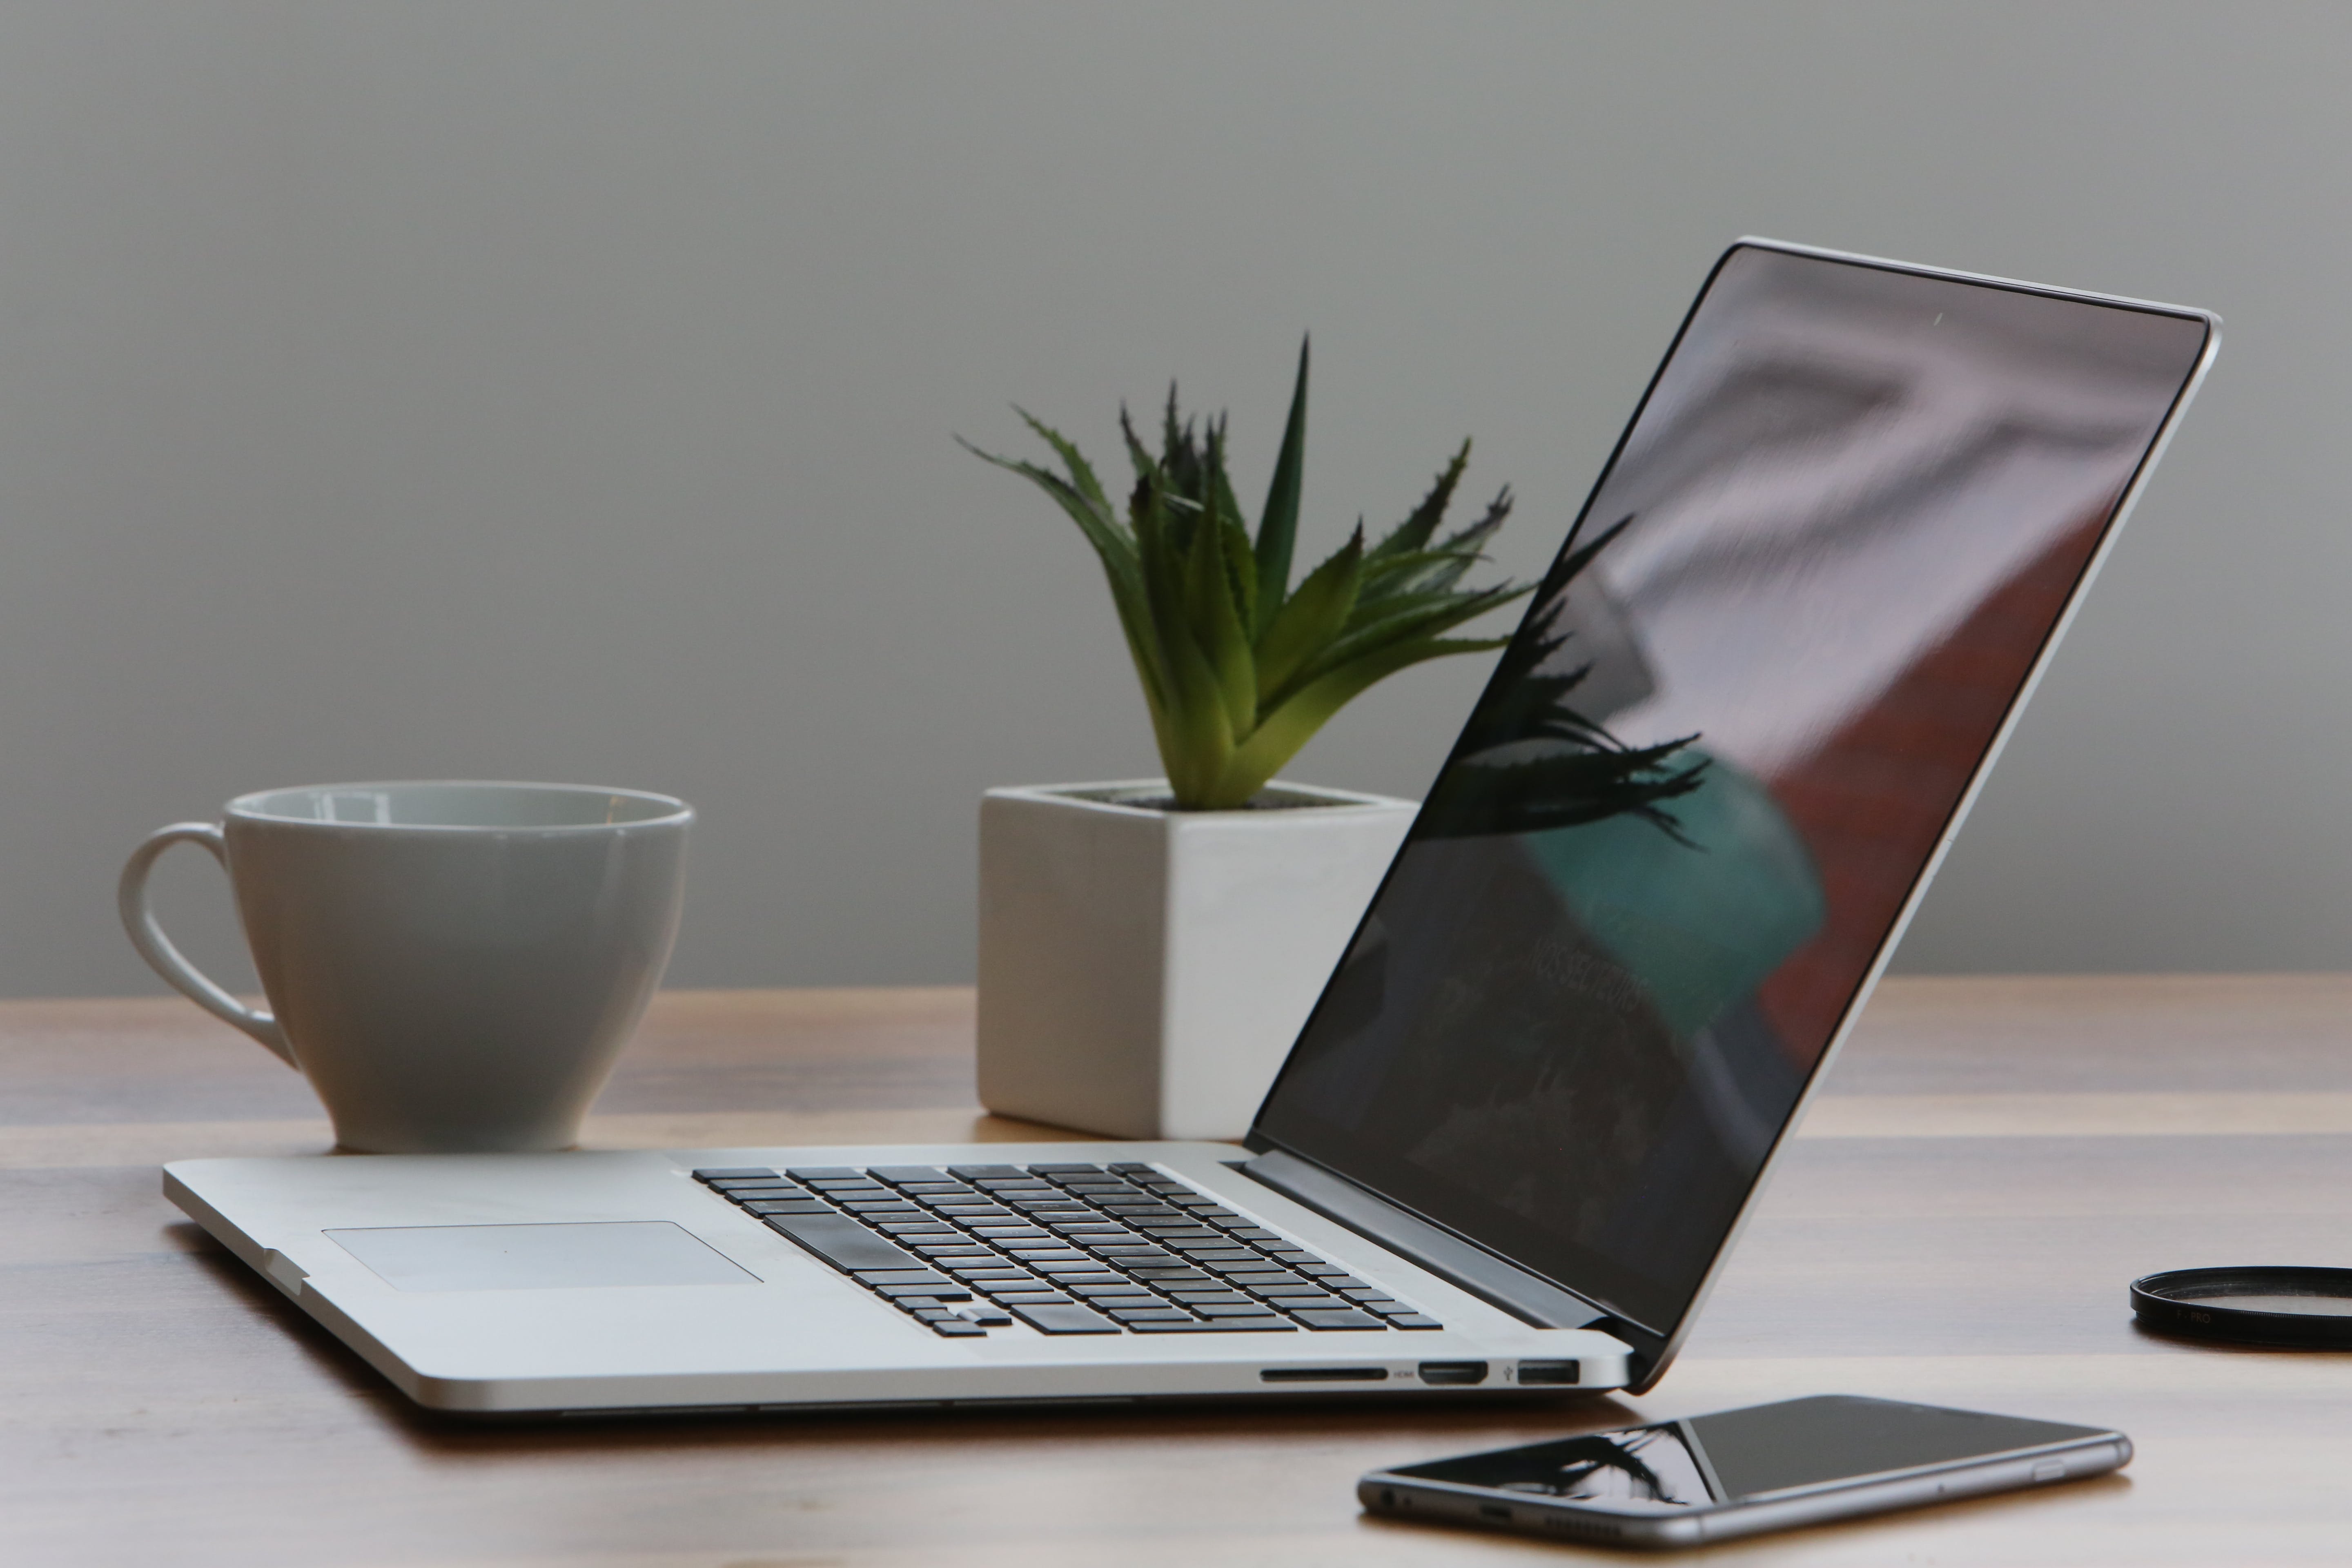 A silver laptop on top of a table. | Source: Pexels